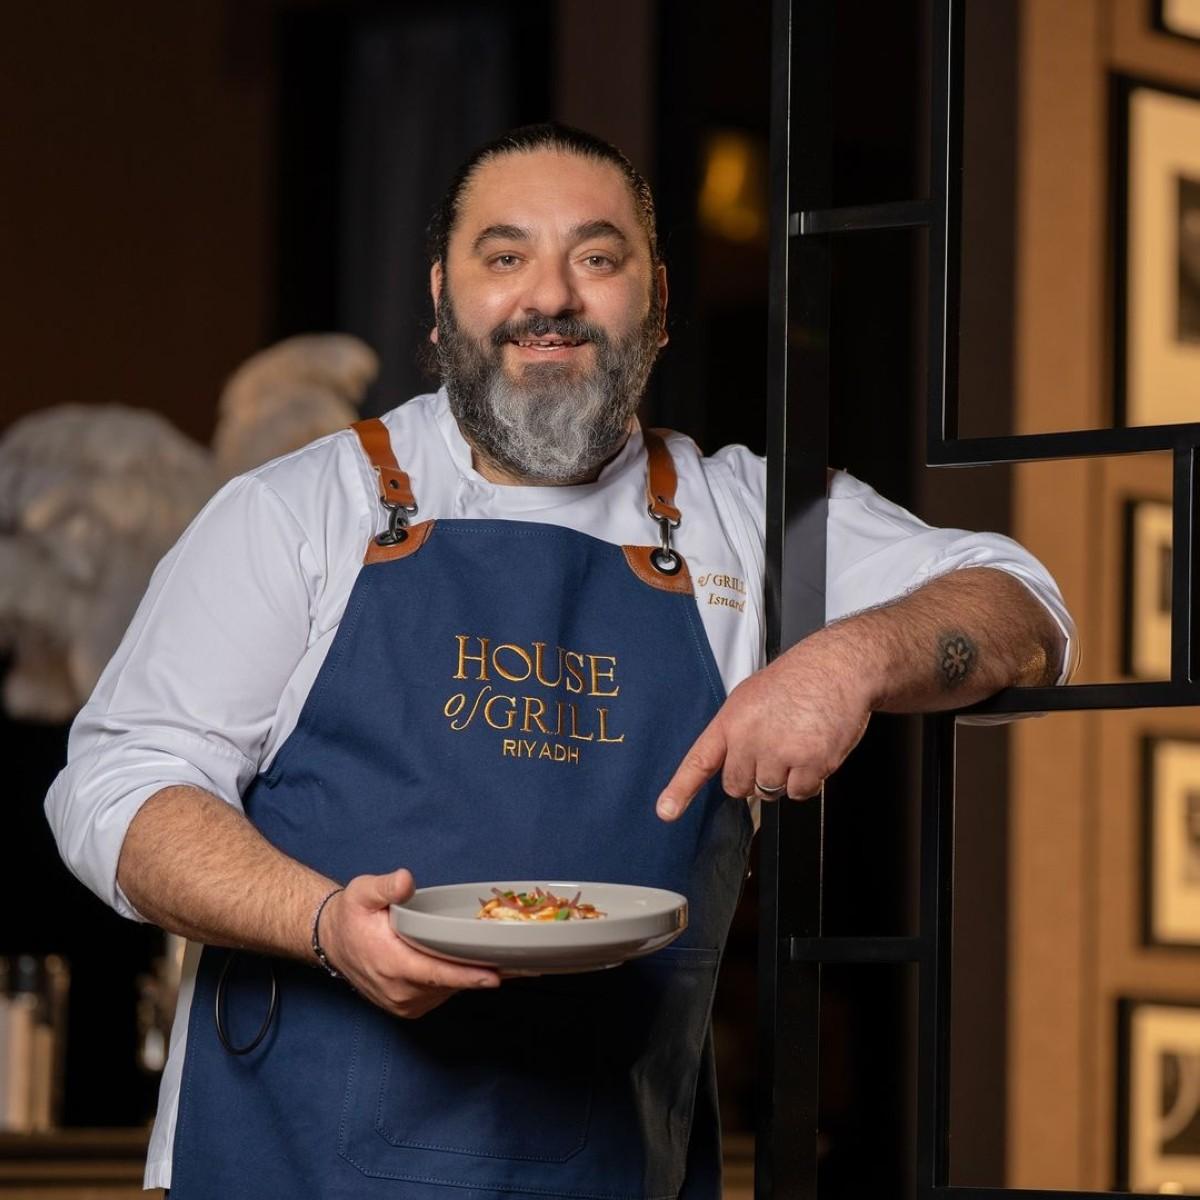 Let this Michelin-starred chef introduce you to House of Grill at Fairmont Hotel Riyadh